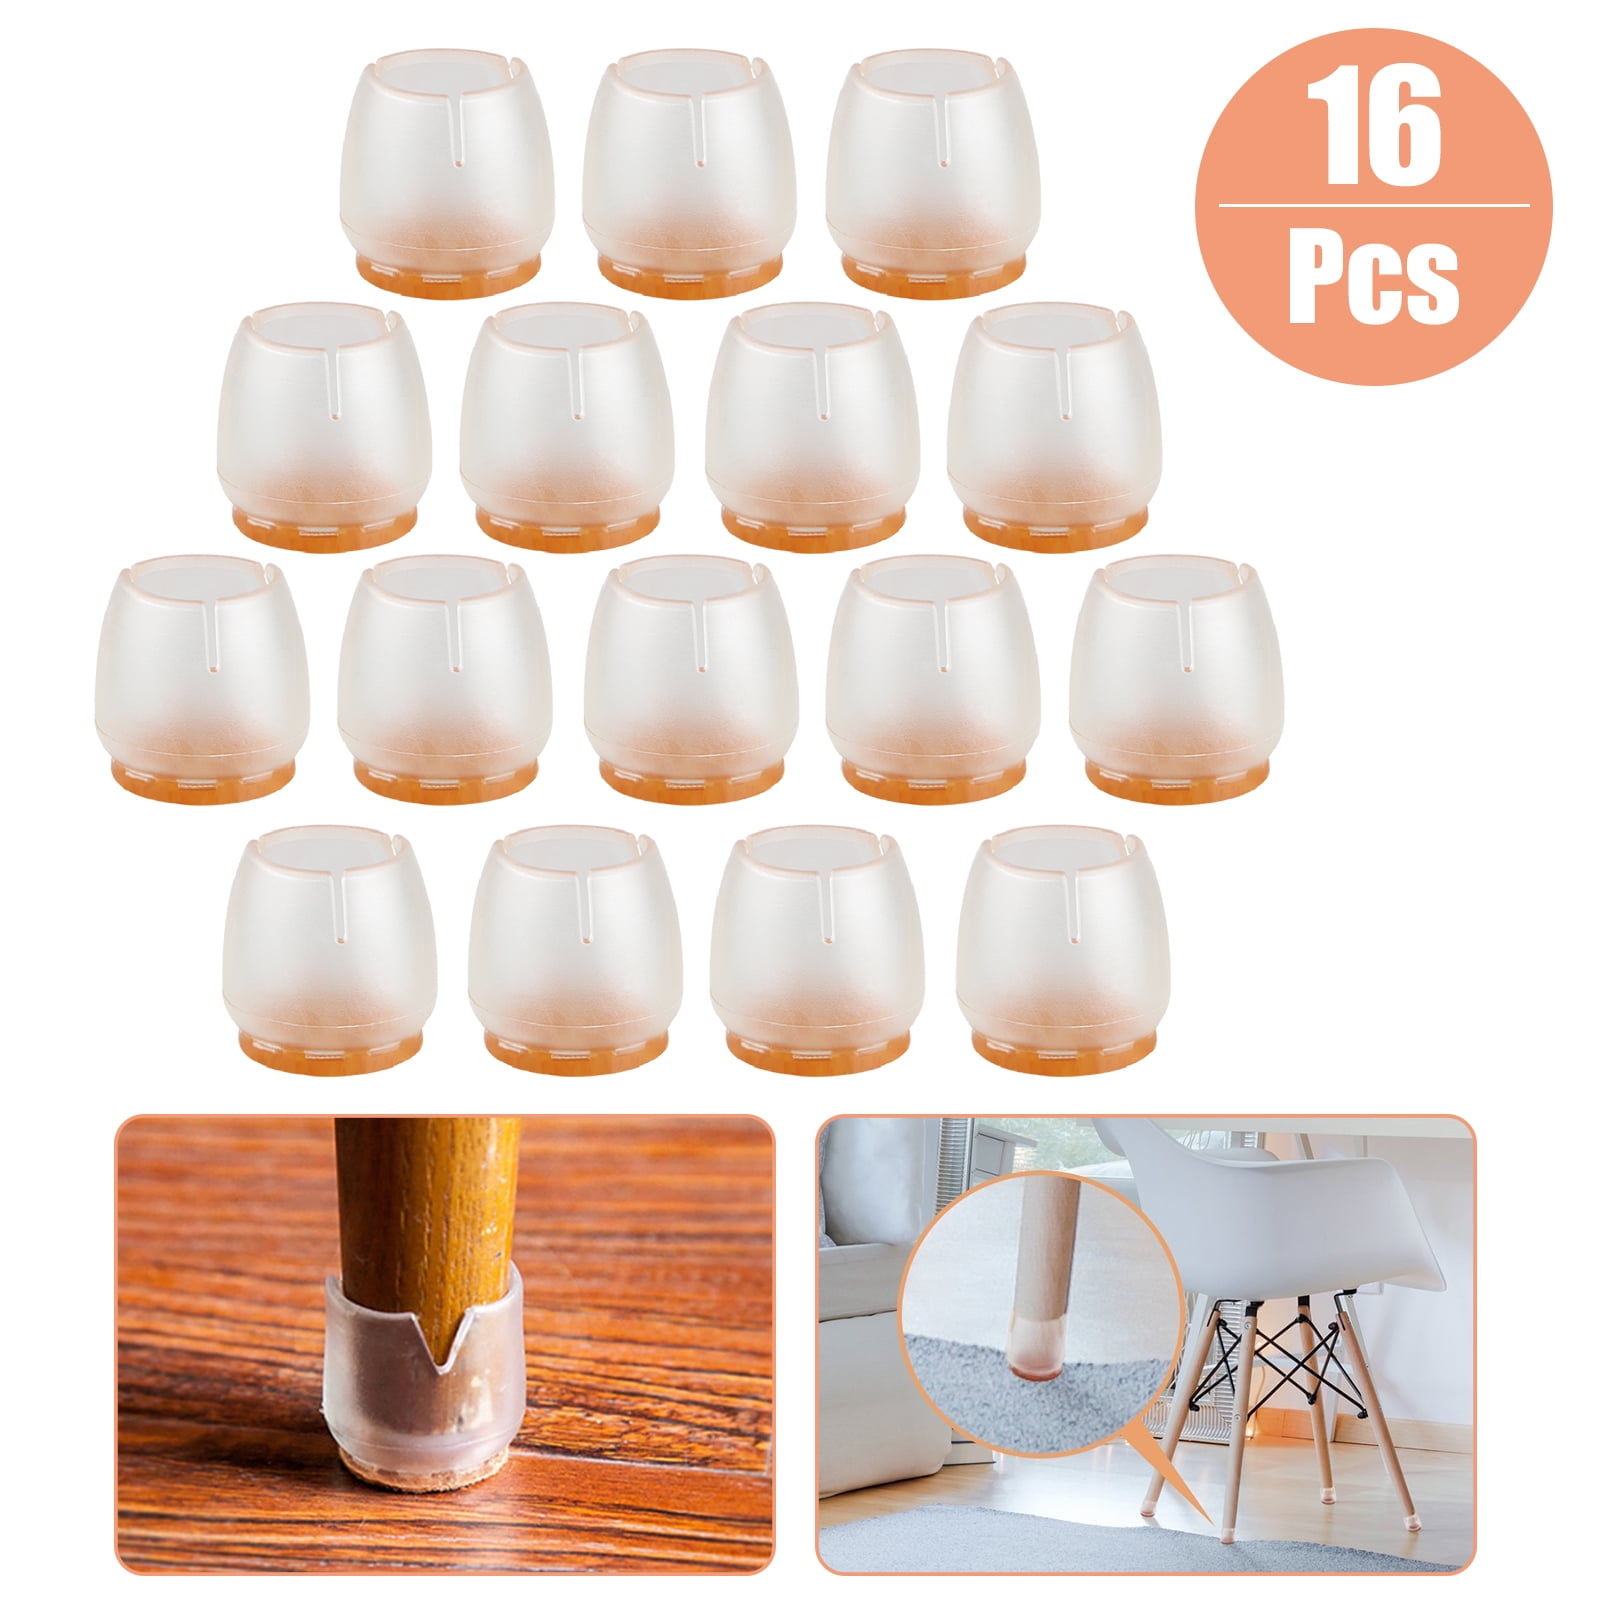 2020 Upgraded Chair Leg Floor Protectors,Silicone Chair Leg Caps,Furniture Table Feet Cover,Prevents Scratches and Noise Without Leaving Marks White,32 Pcs Furniture Silicon Protection Cover